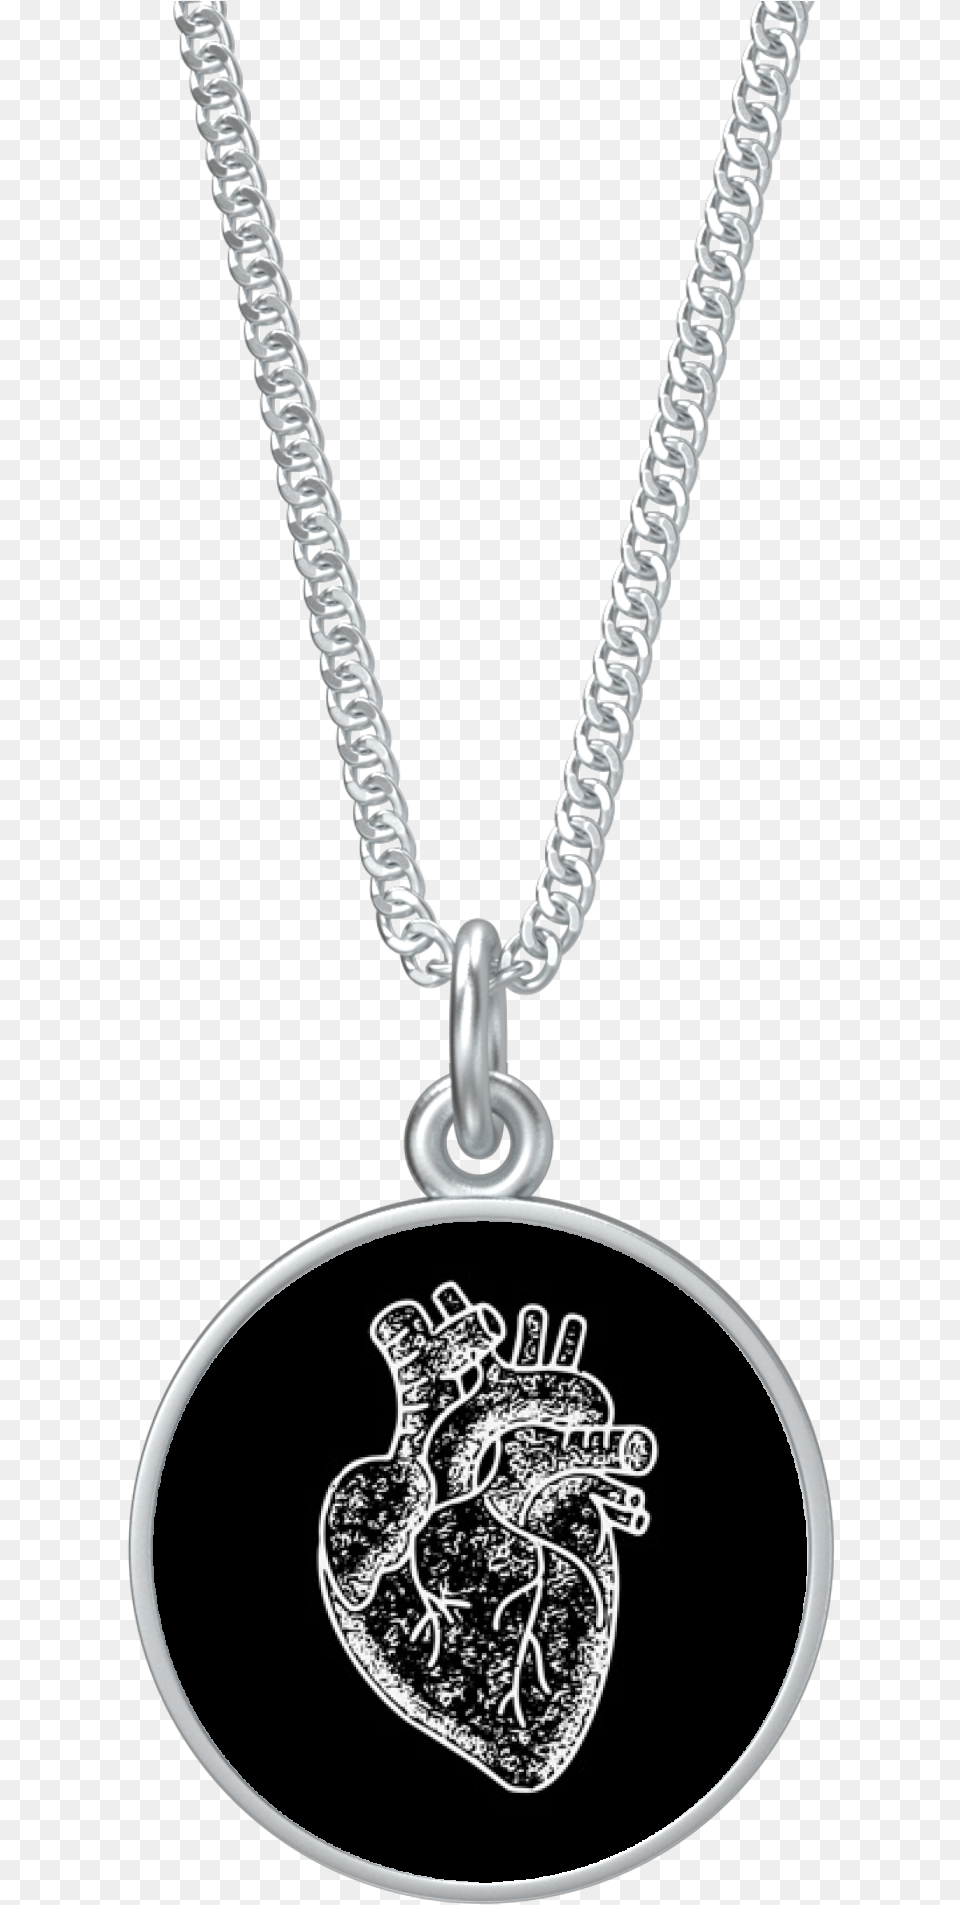 Anatomical Heart Coin Pendant On Chain Silver, Accessories, Jewelry, Necklace, Diamond Png